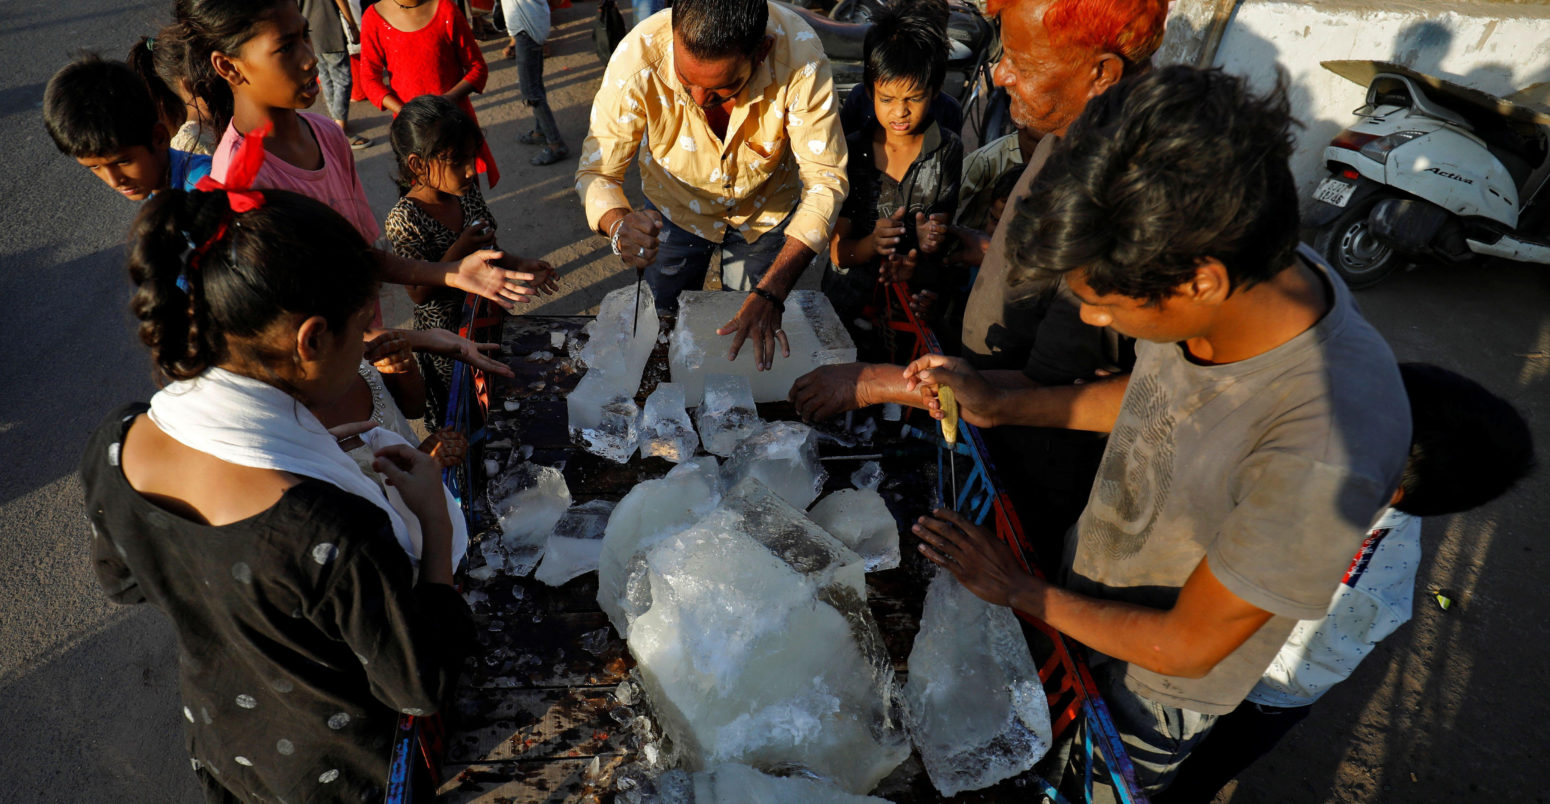 A man breaks a block of ice to distribute it among the residents of a slum during hot weather in Ahmedabad, India, April 28, 2022